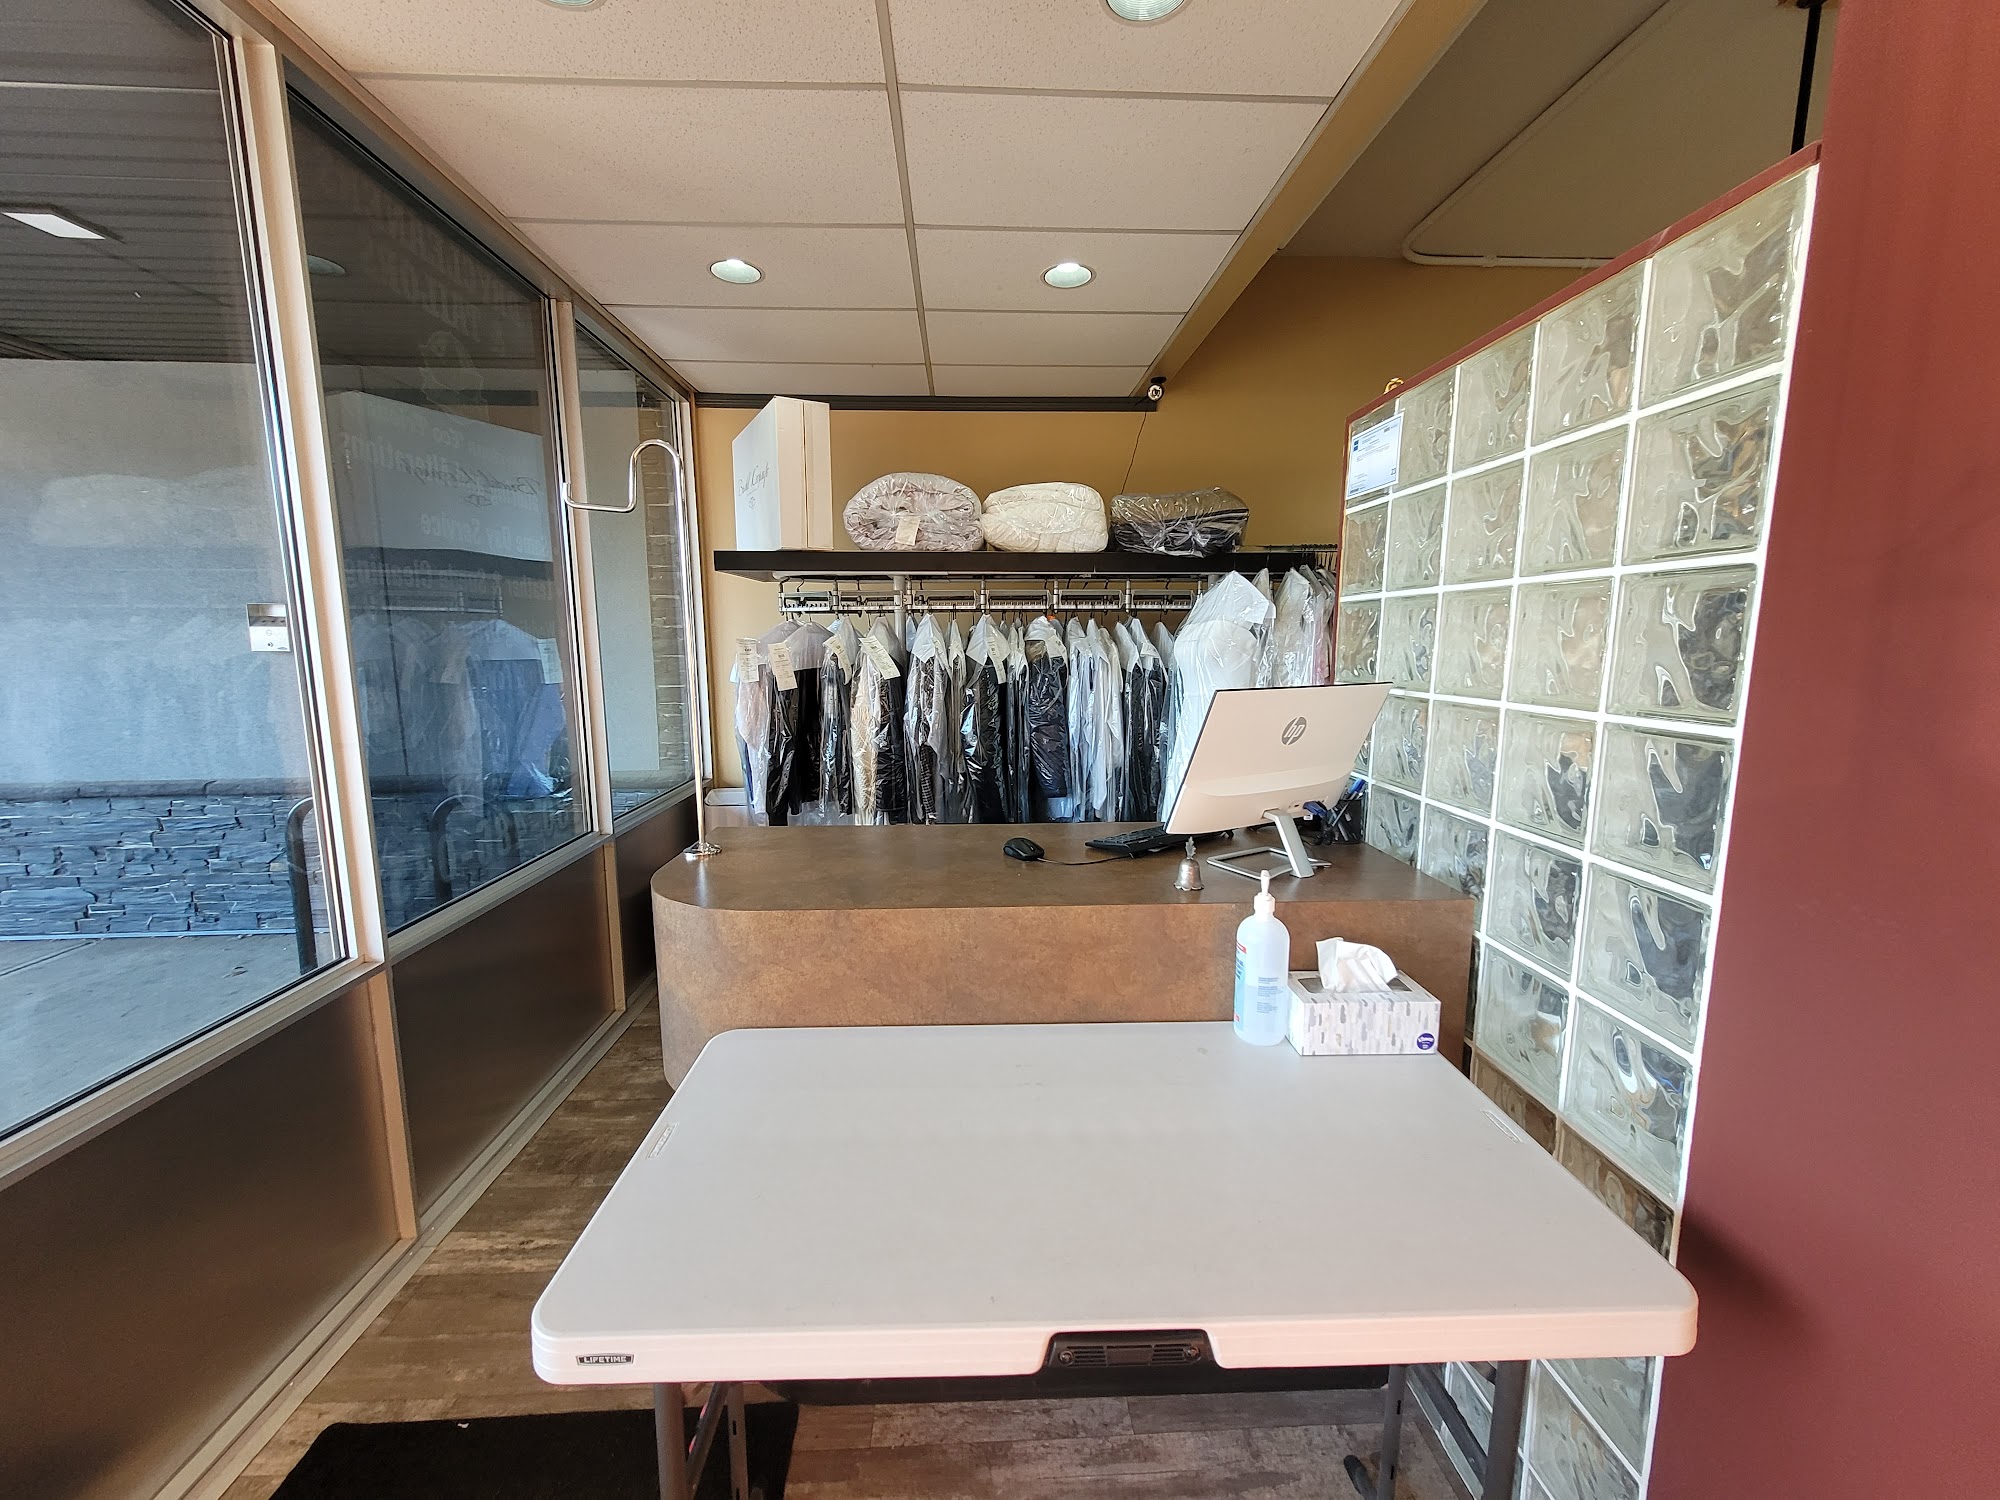 VALLEYVIEW DRYCLEANERS & TAILORS